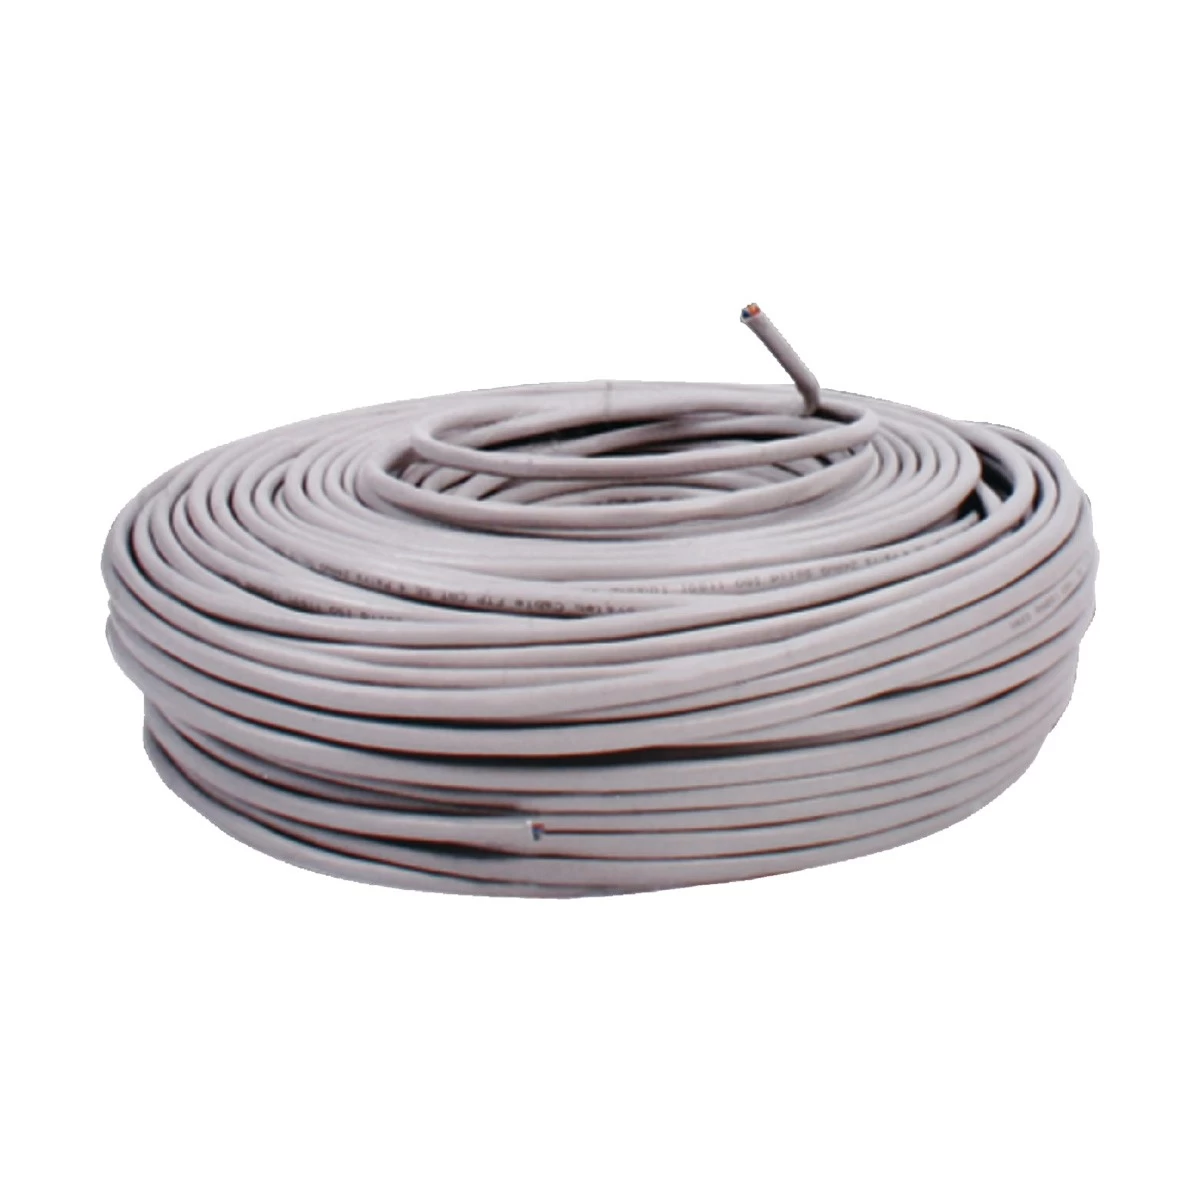 Micronet Cat-6, 305 Meter, Grey Network Cable